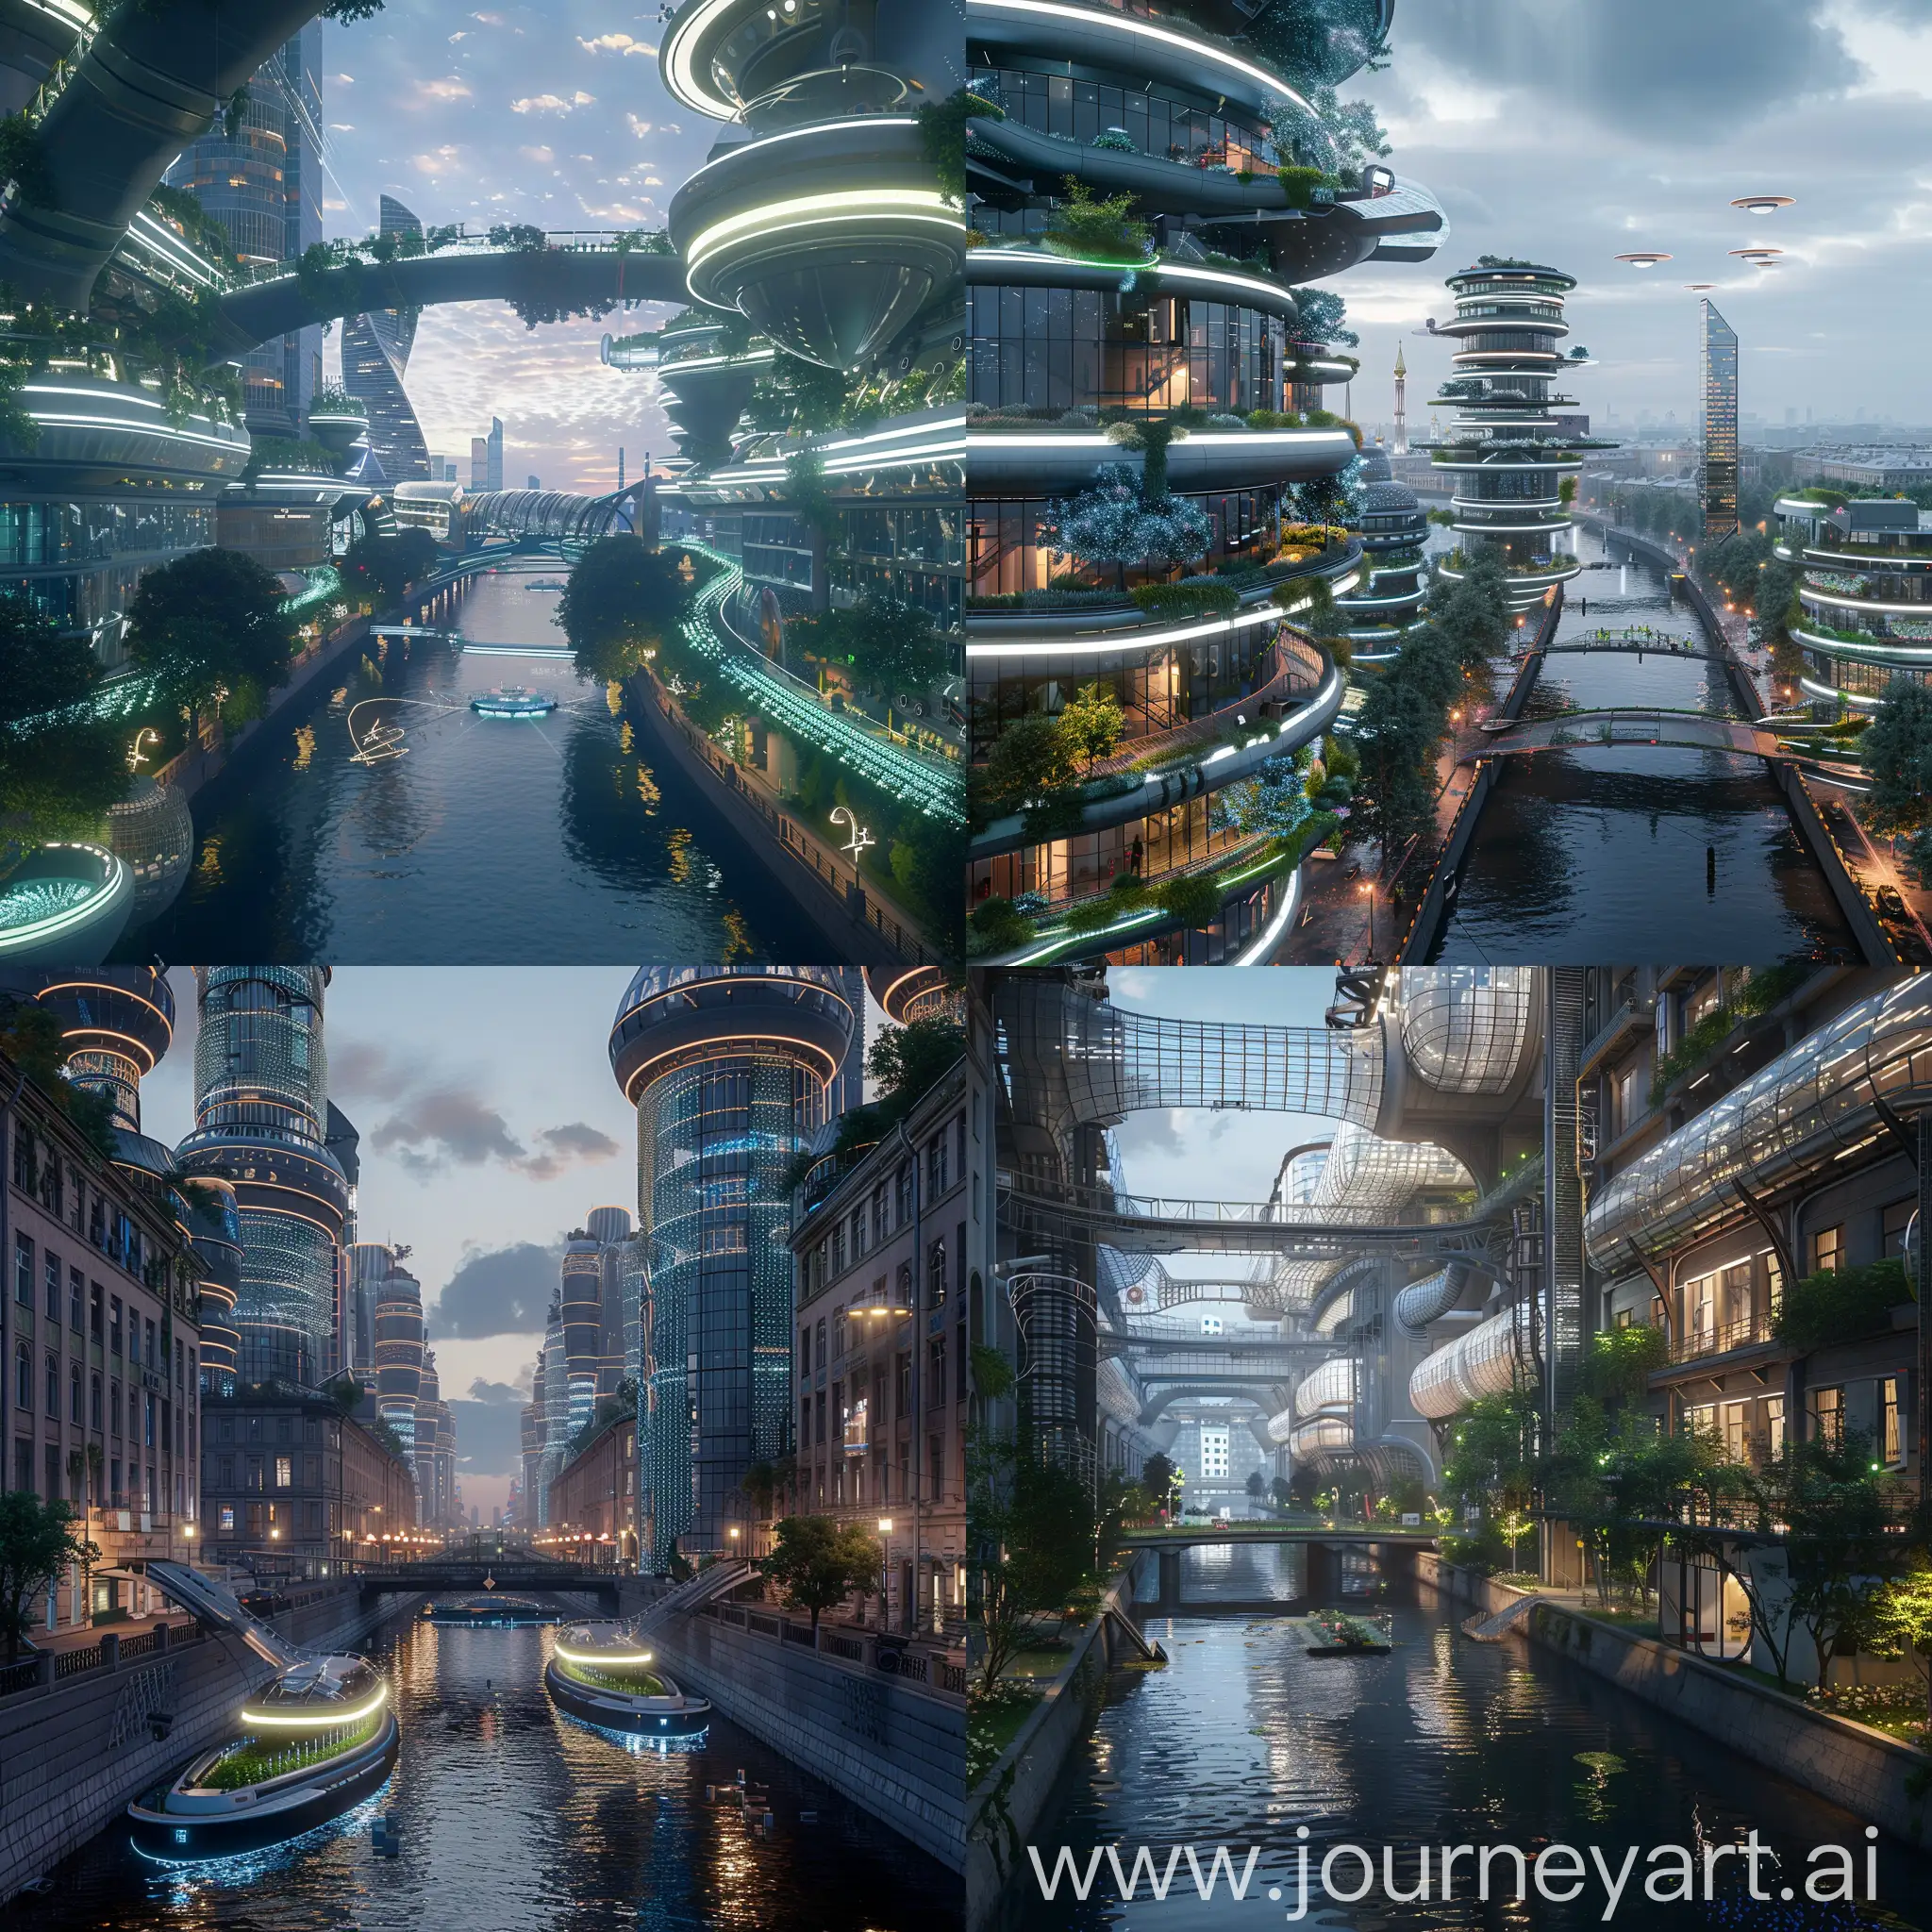 High-tech futuristic Saint Petersburg, Bioluminescent Canals, Adaptive Architecture, Vertical Farms, Hyperloop Transit Tubes, Augmented Reality Overlays, Neuro-Apartments, 3D-Printed Infrastructure, Waste-to-Energy Plants, AI-Powered Public Services, Community Microgrids, Sky Farms, Kinetic Facades, Air Filtration Towers, Smart Street Lighting, Hydroponic Bridges, Personal Landing Pads, Interactive Public Art, Weather-Responsive Architecture, Pneumatic Waste Collection, Transparent Skyscrapers, unreal engine 5 --stylize  1000